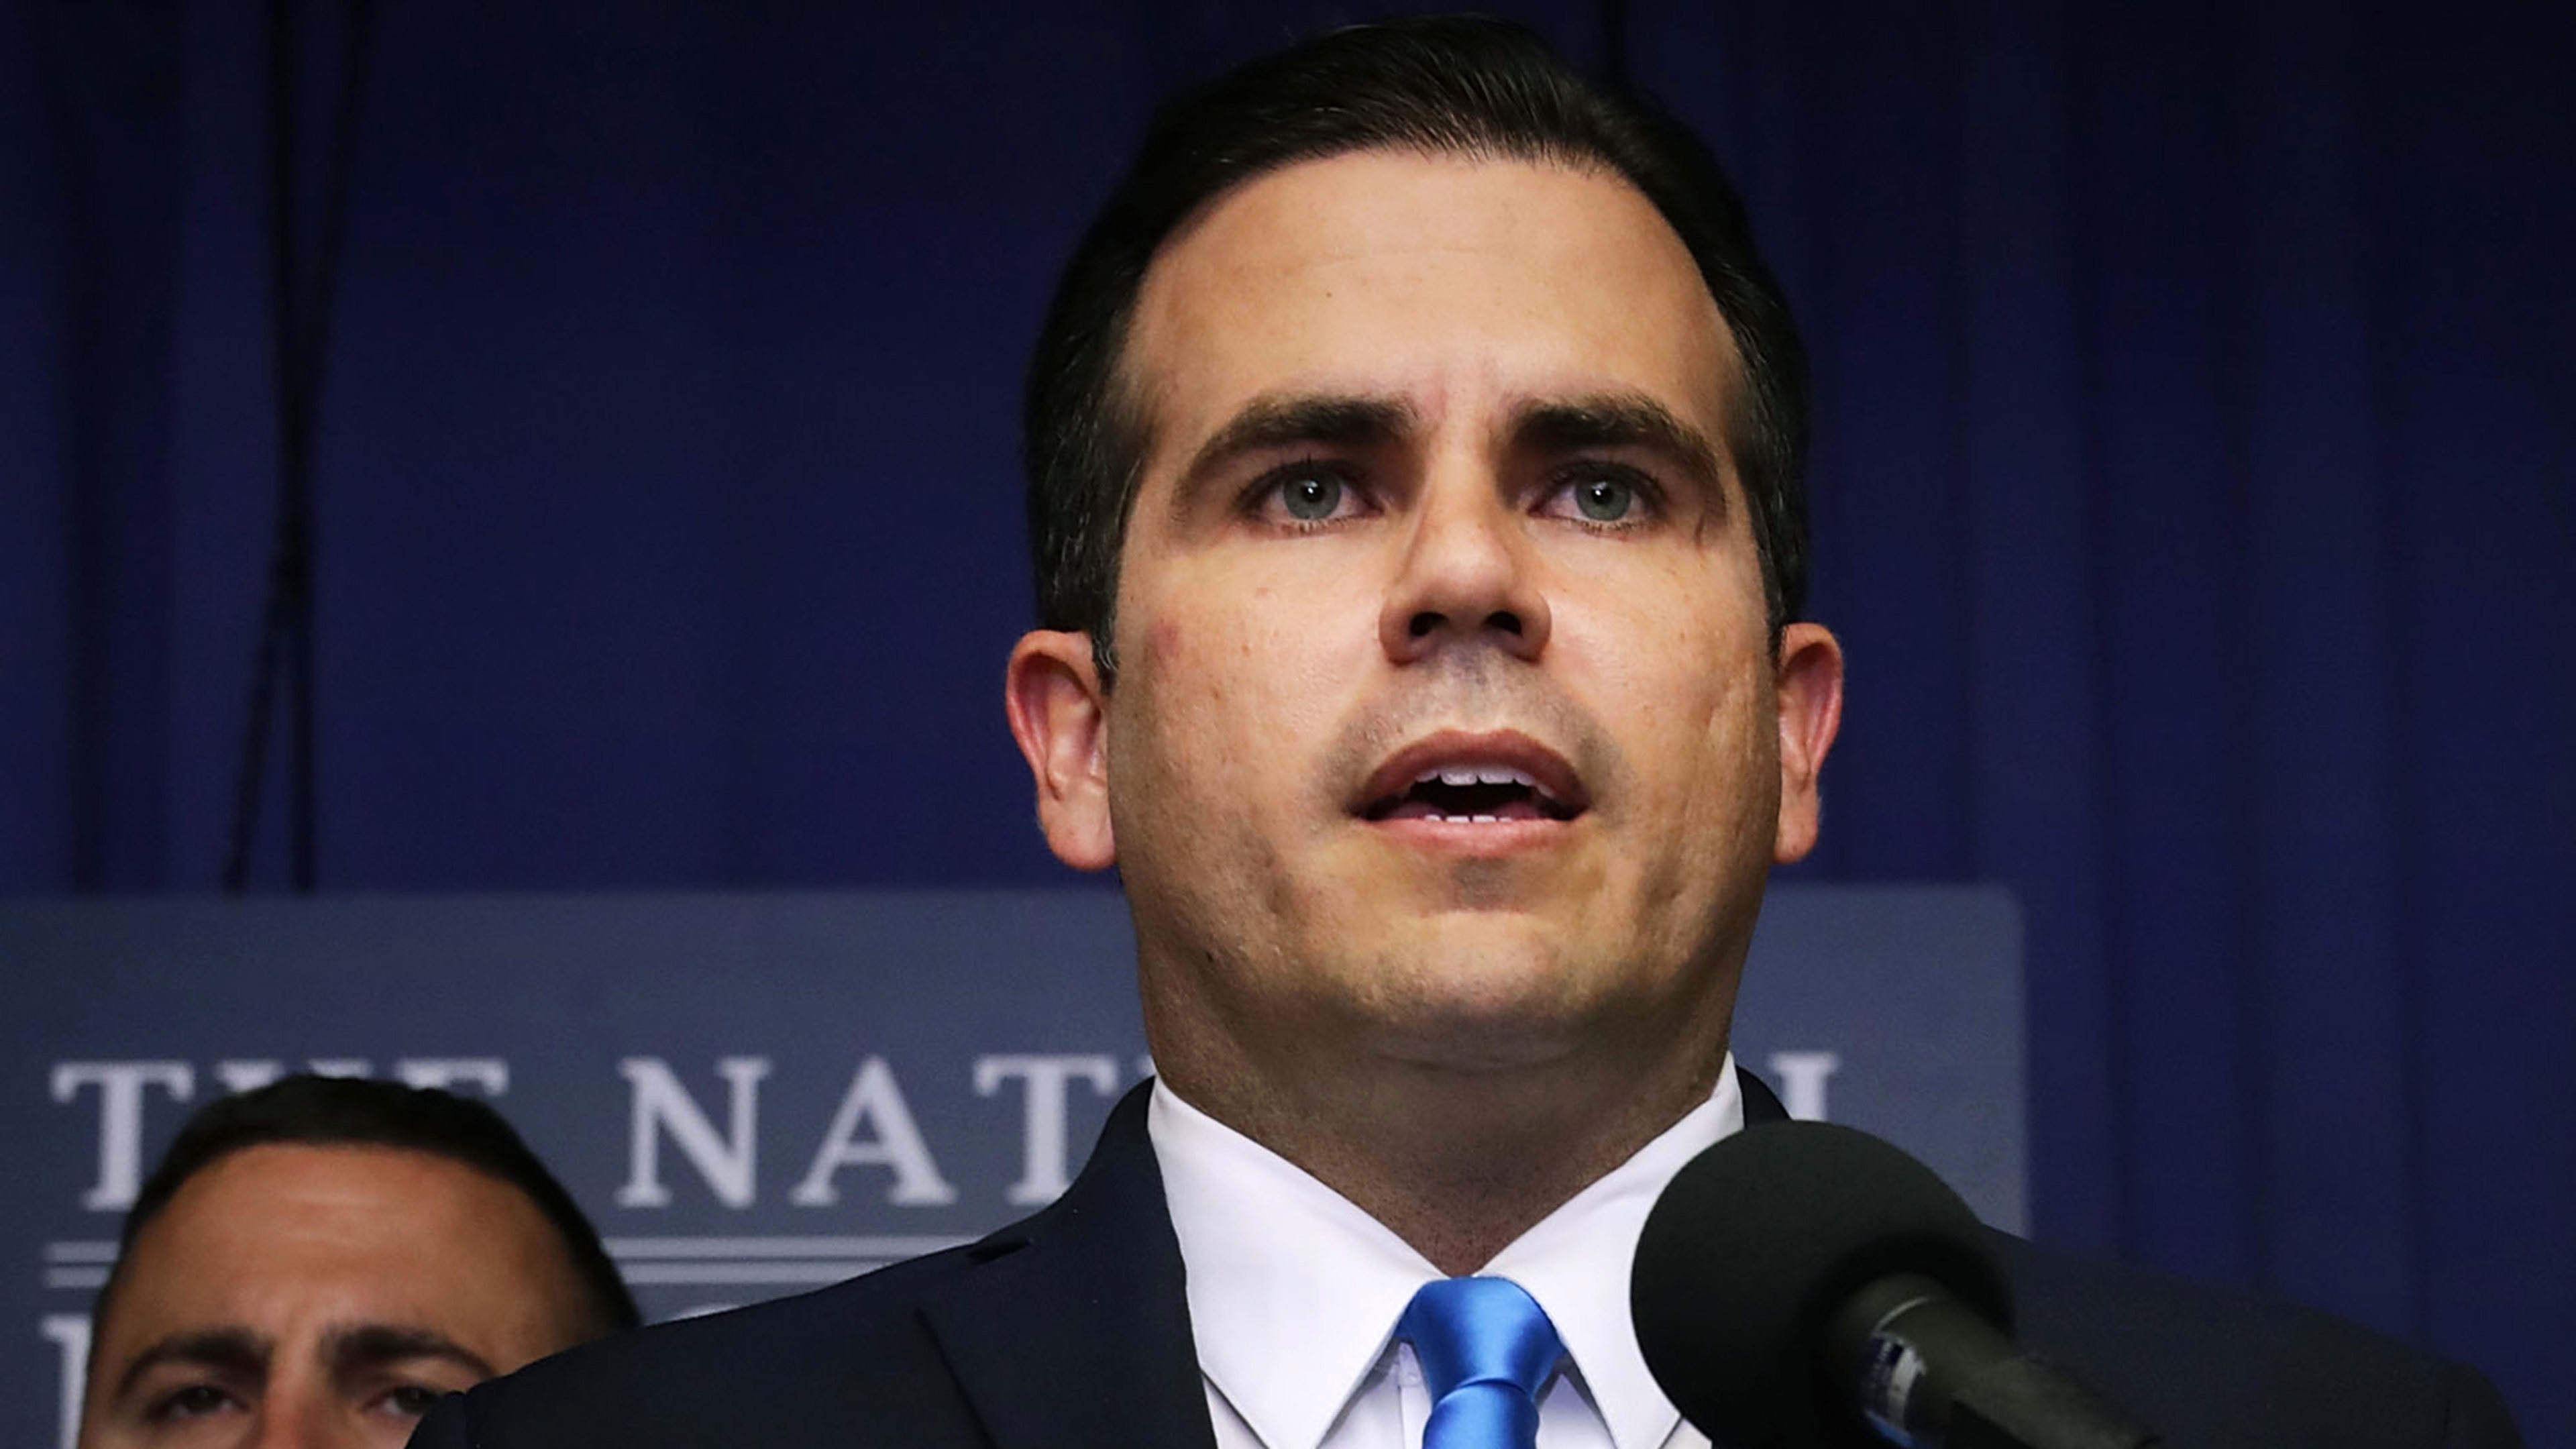 Puerto Rico’s governor is learning hard-fought leadership lessons